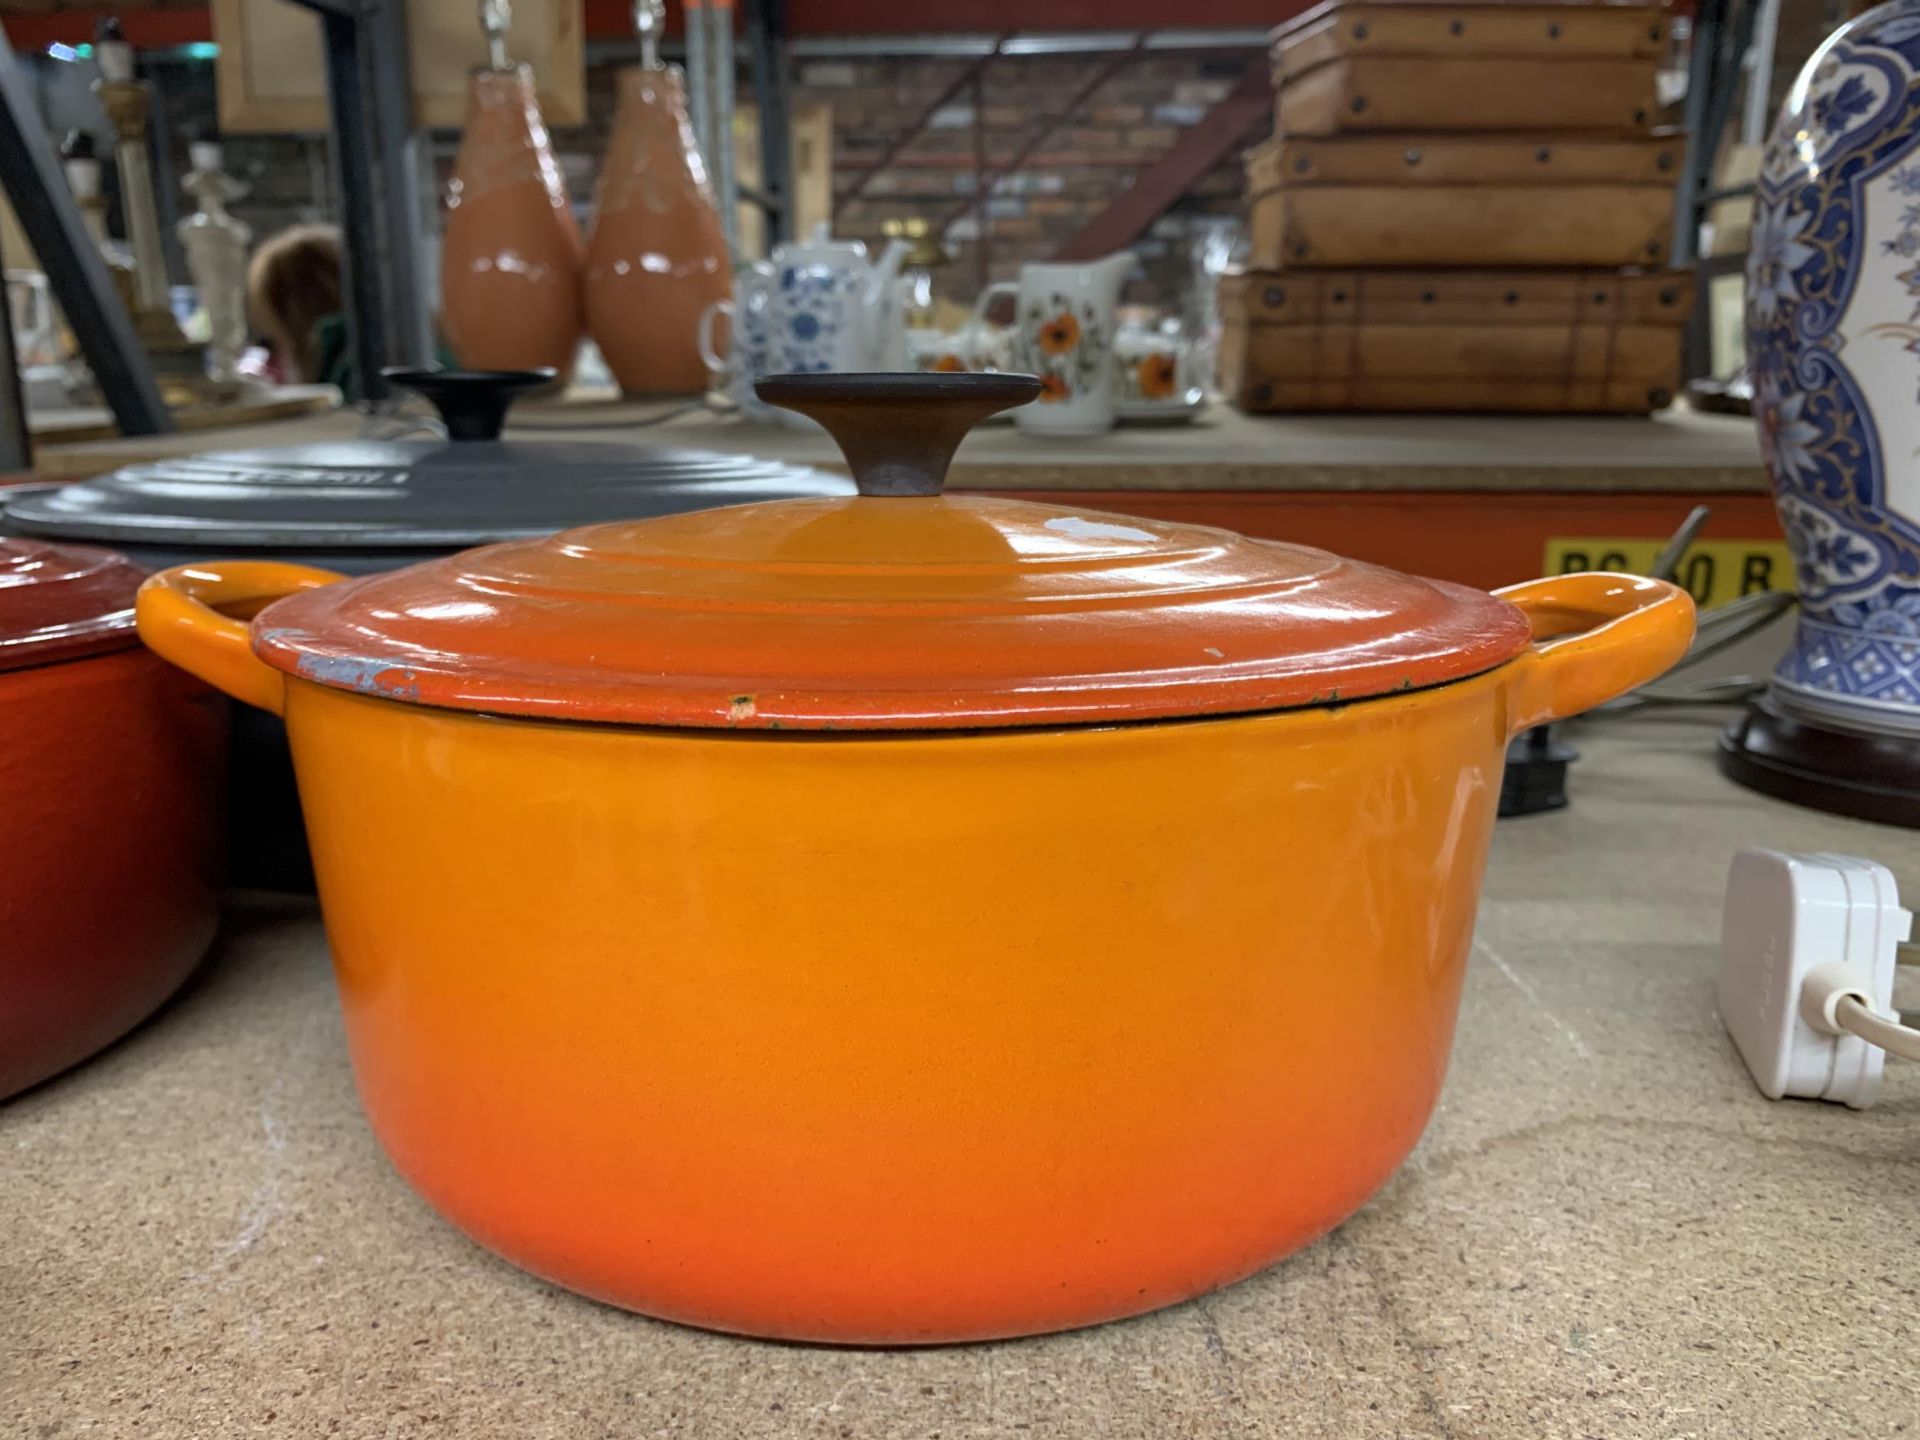 FIVE PIECES OF LE CREUSET COOK WARE TO INCLUDE THREE LIDDED CASSEROLE DISHES IN GRADUATING SIZES AND - Image 2 of 4